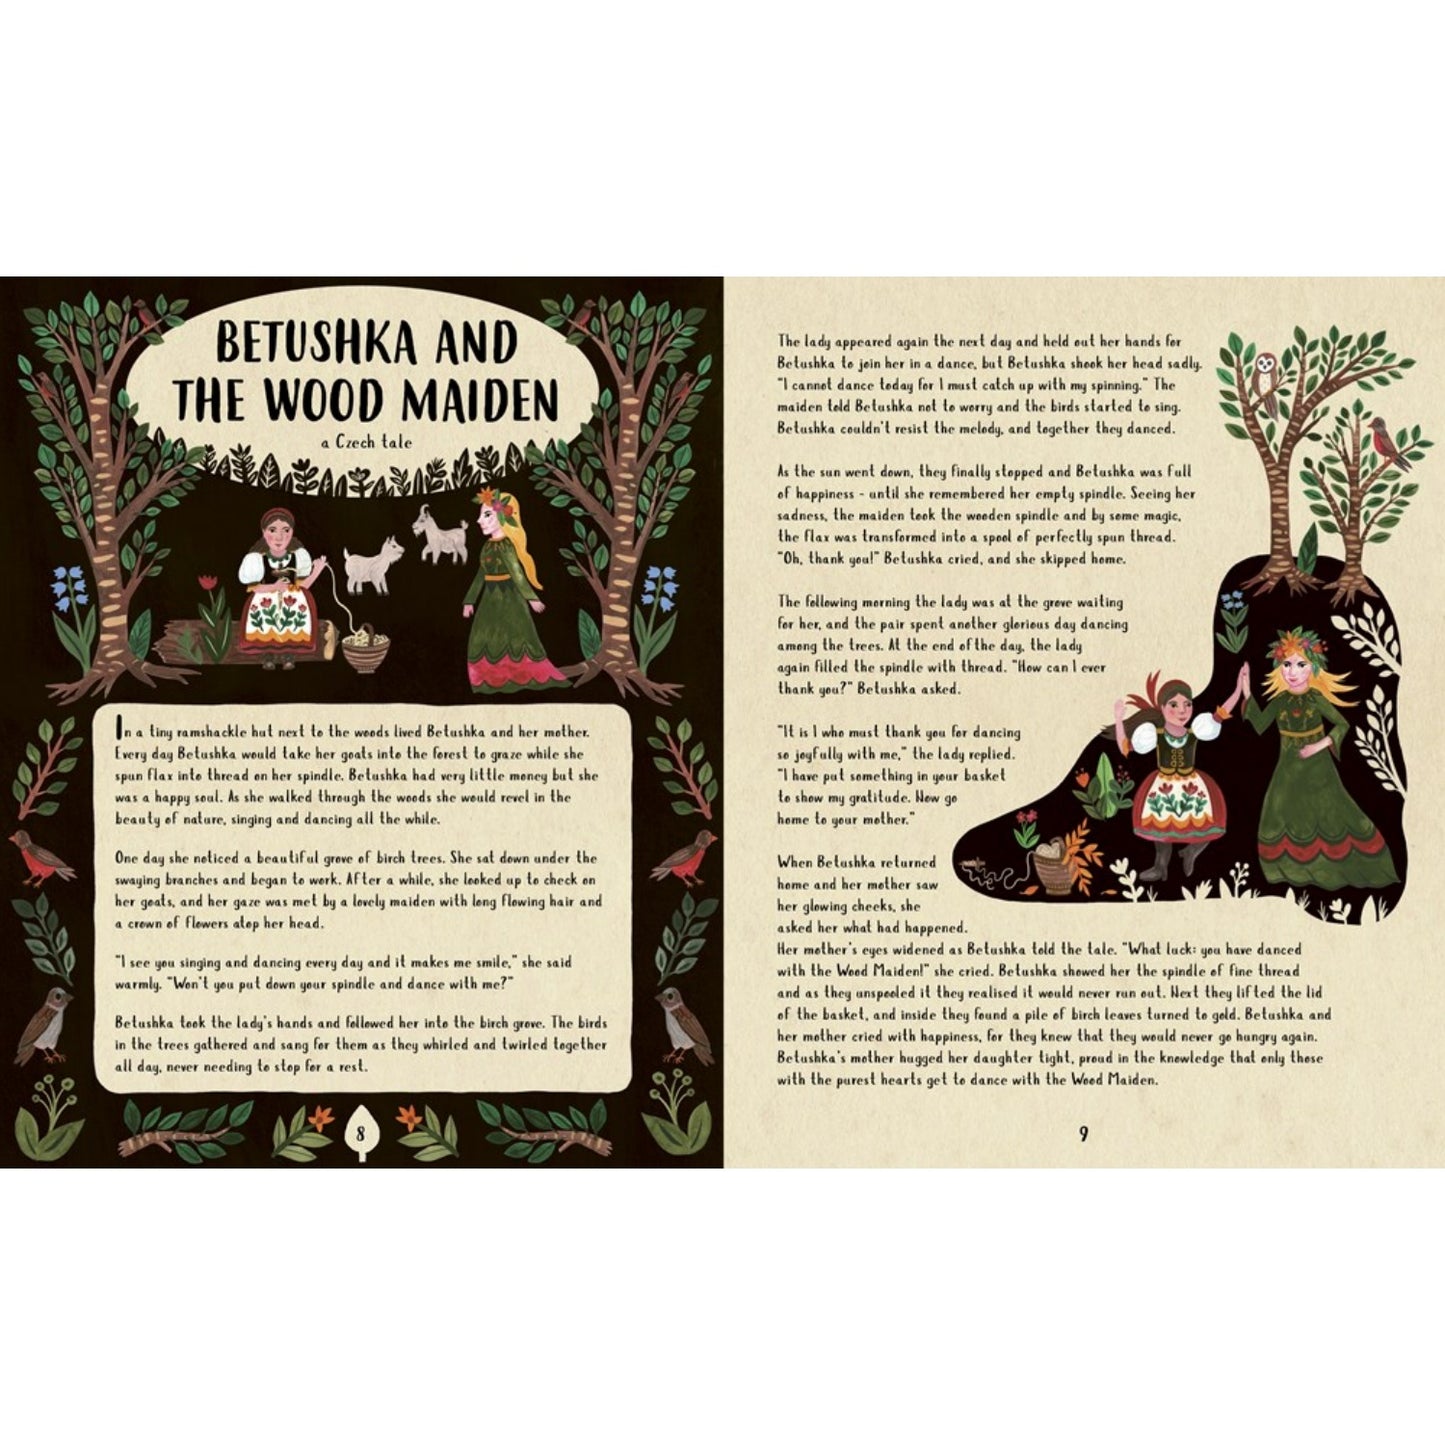 Lore of the Land: Folklore & Wisdom from the Wild Earth | Hardcover | Children’s Book on Tales and Stories